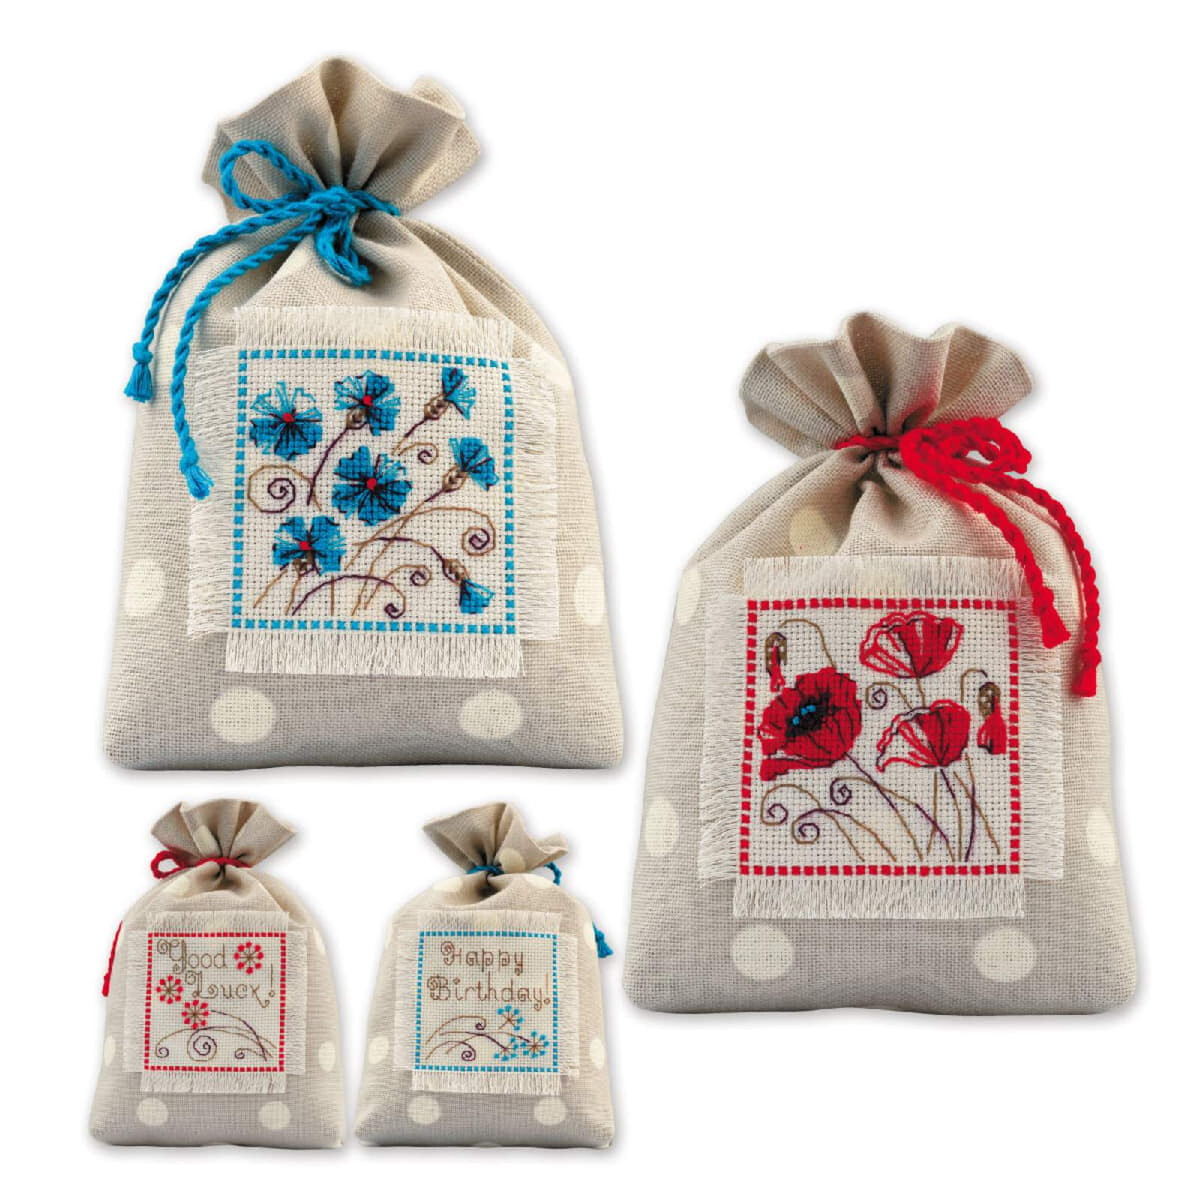 Riolis counted cross stitch kit "Gift bags set of 2...